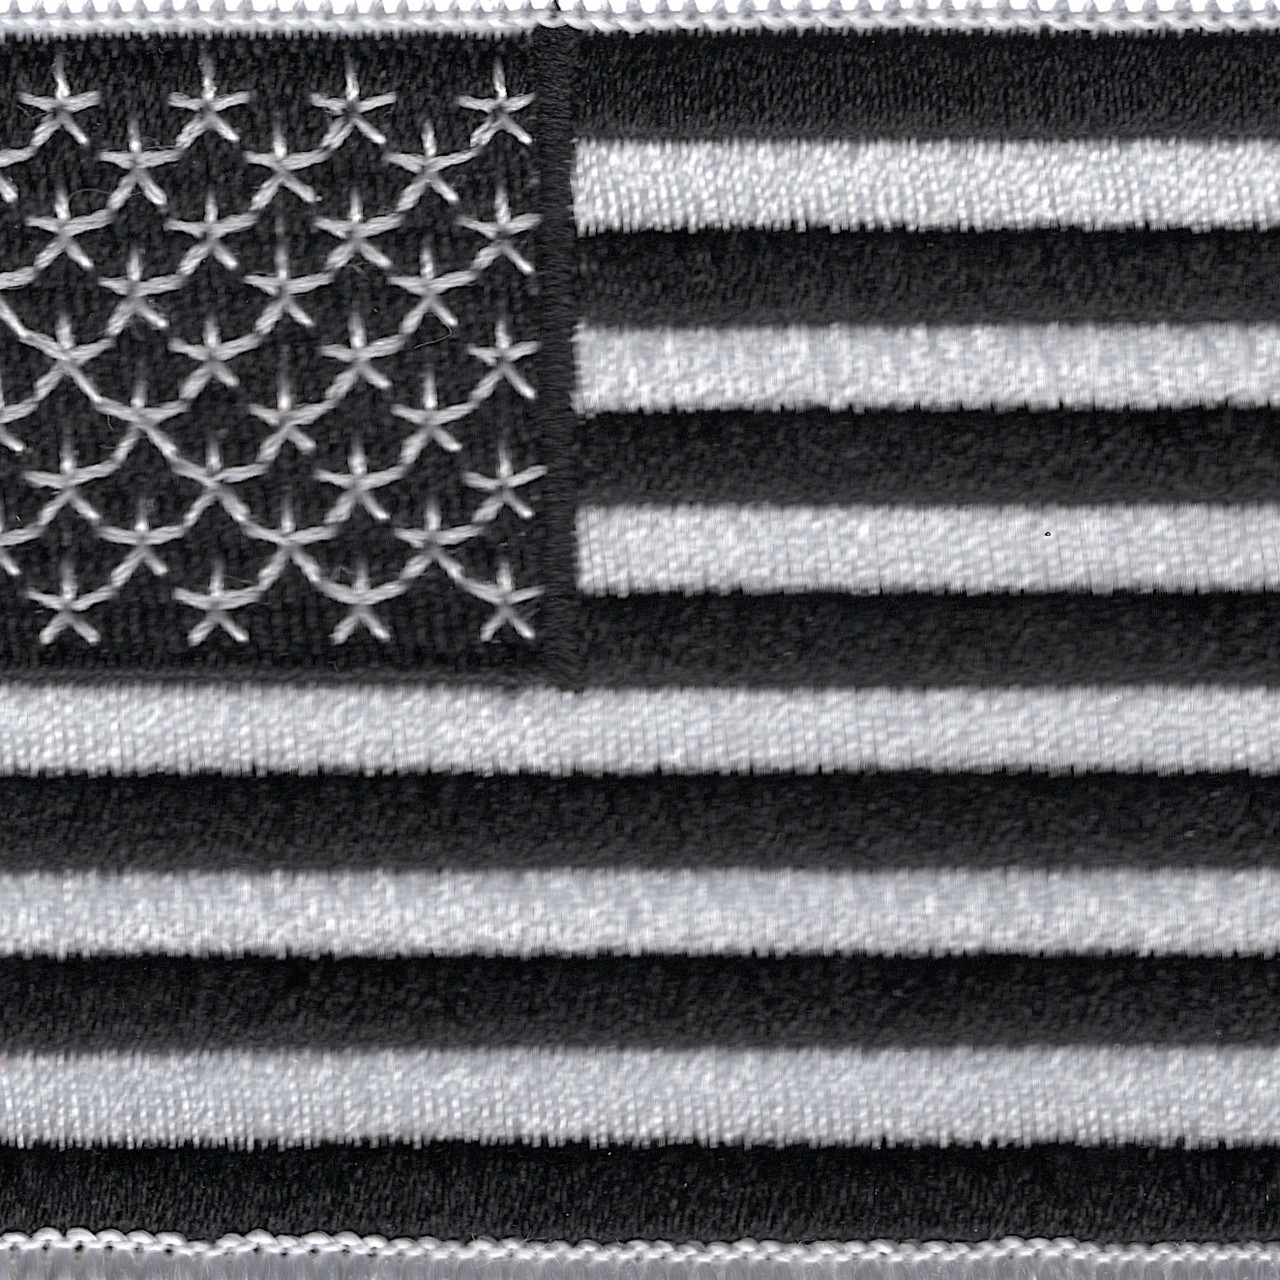 Black And White USA United States Flag Patch, Patriotic Patches